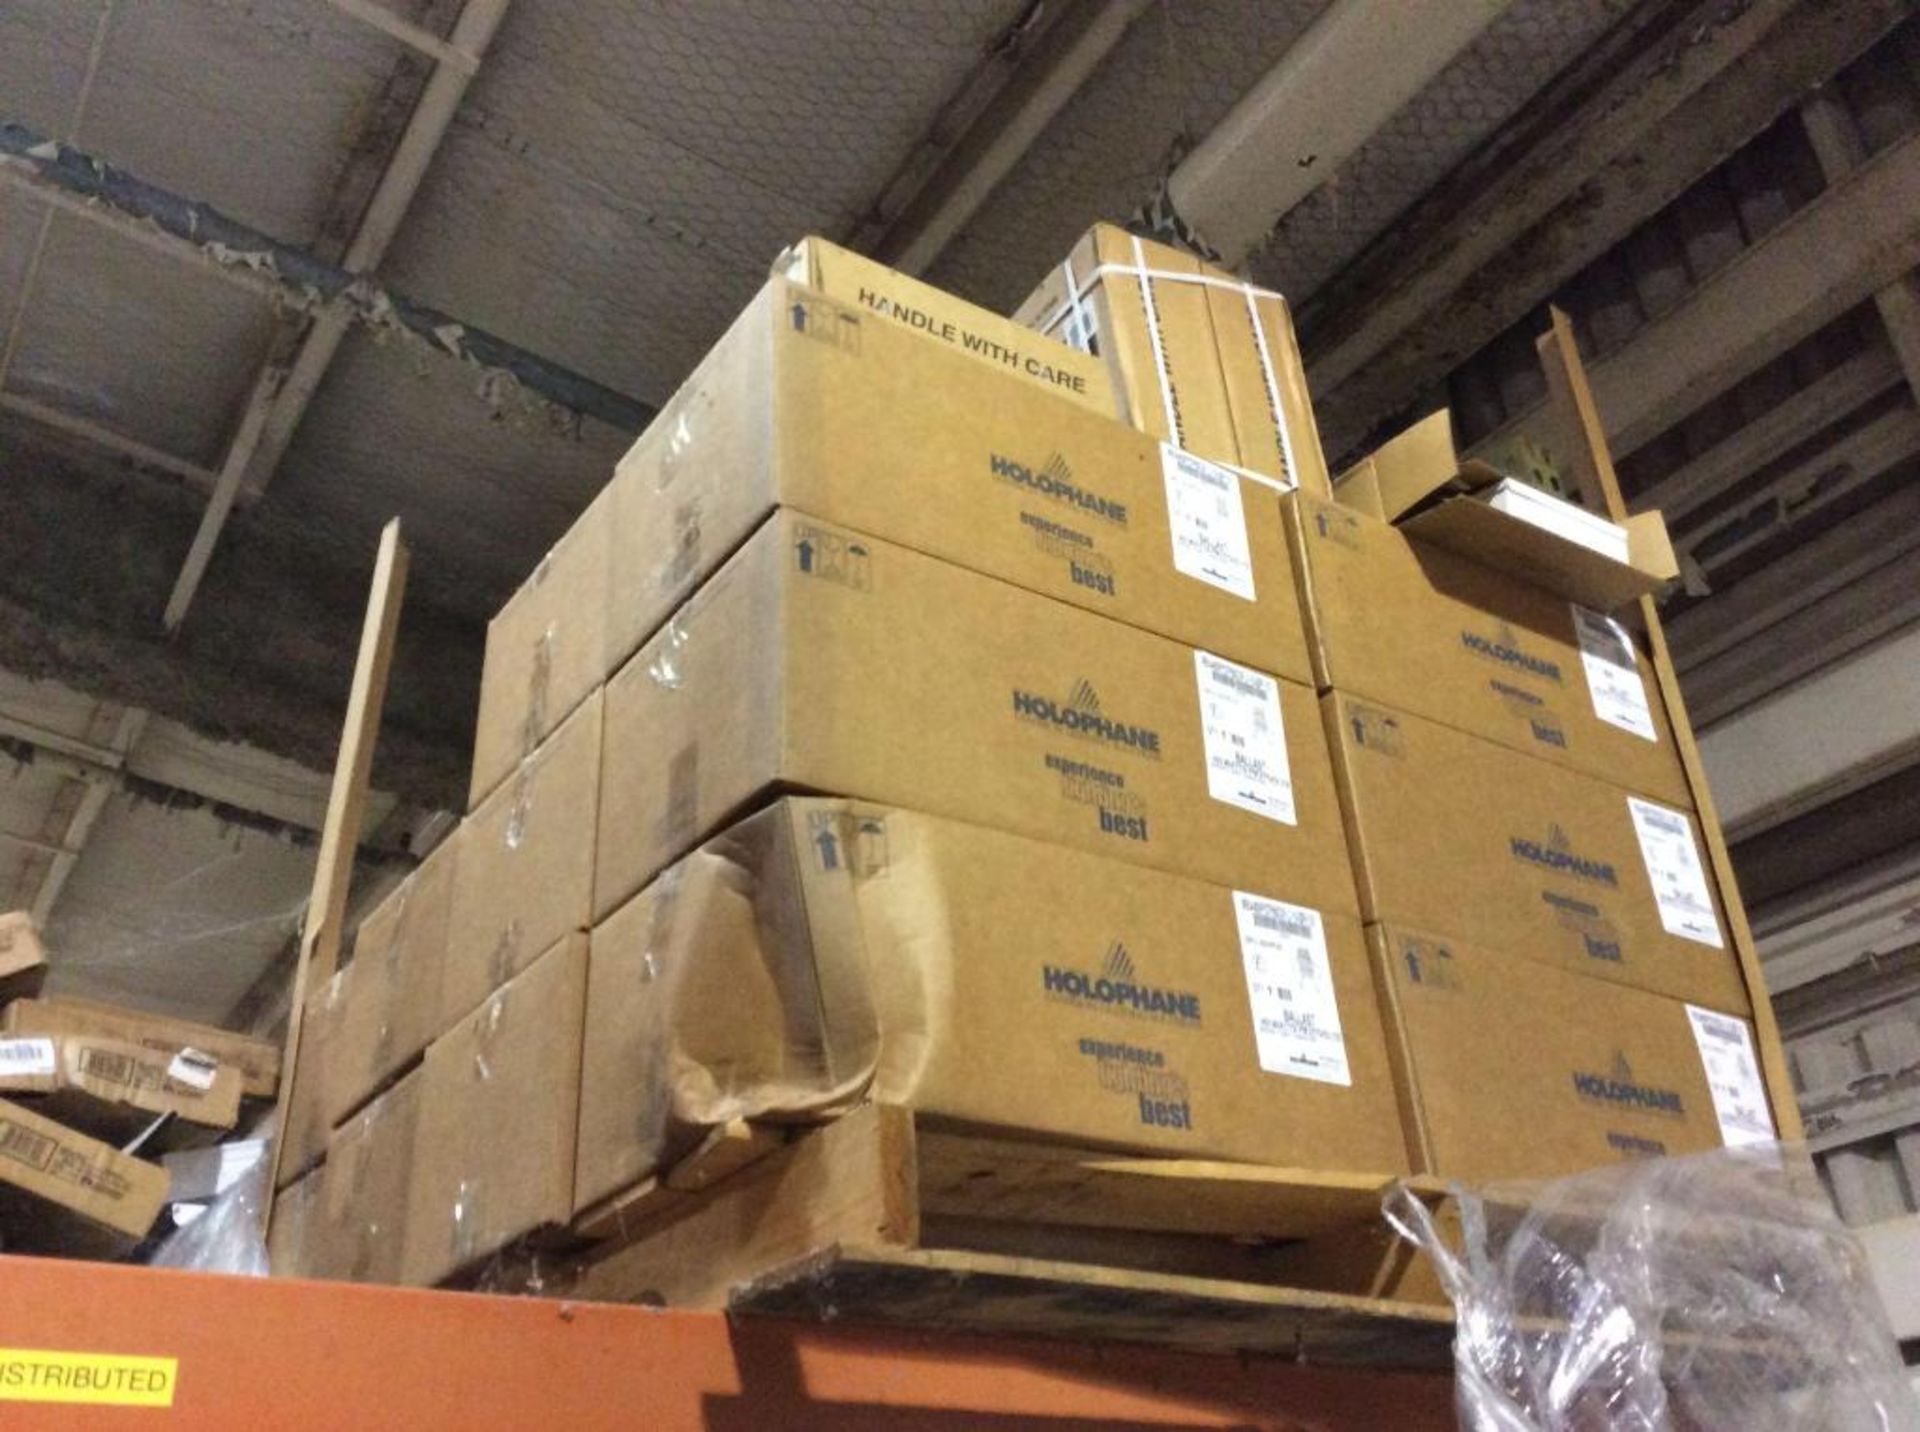 Lot of asst light fixtures and bulbs, contents of 17 pallets - Image 8 of 8